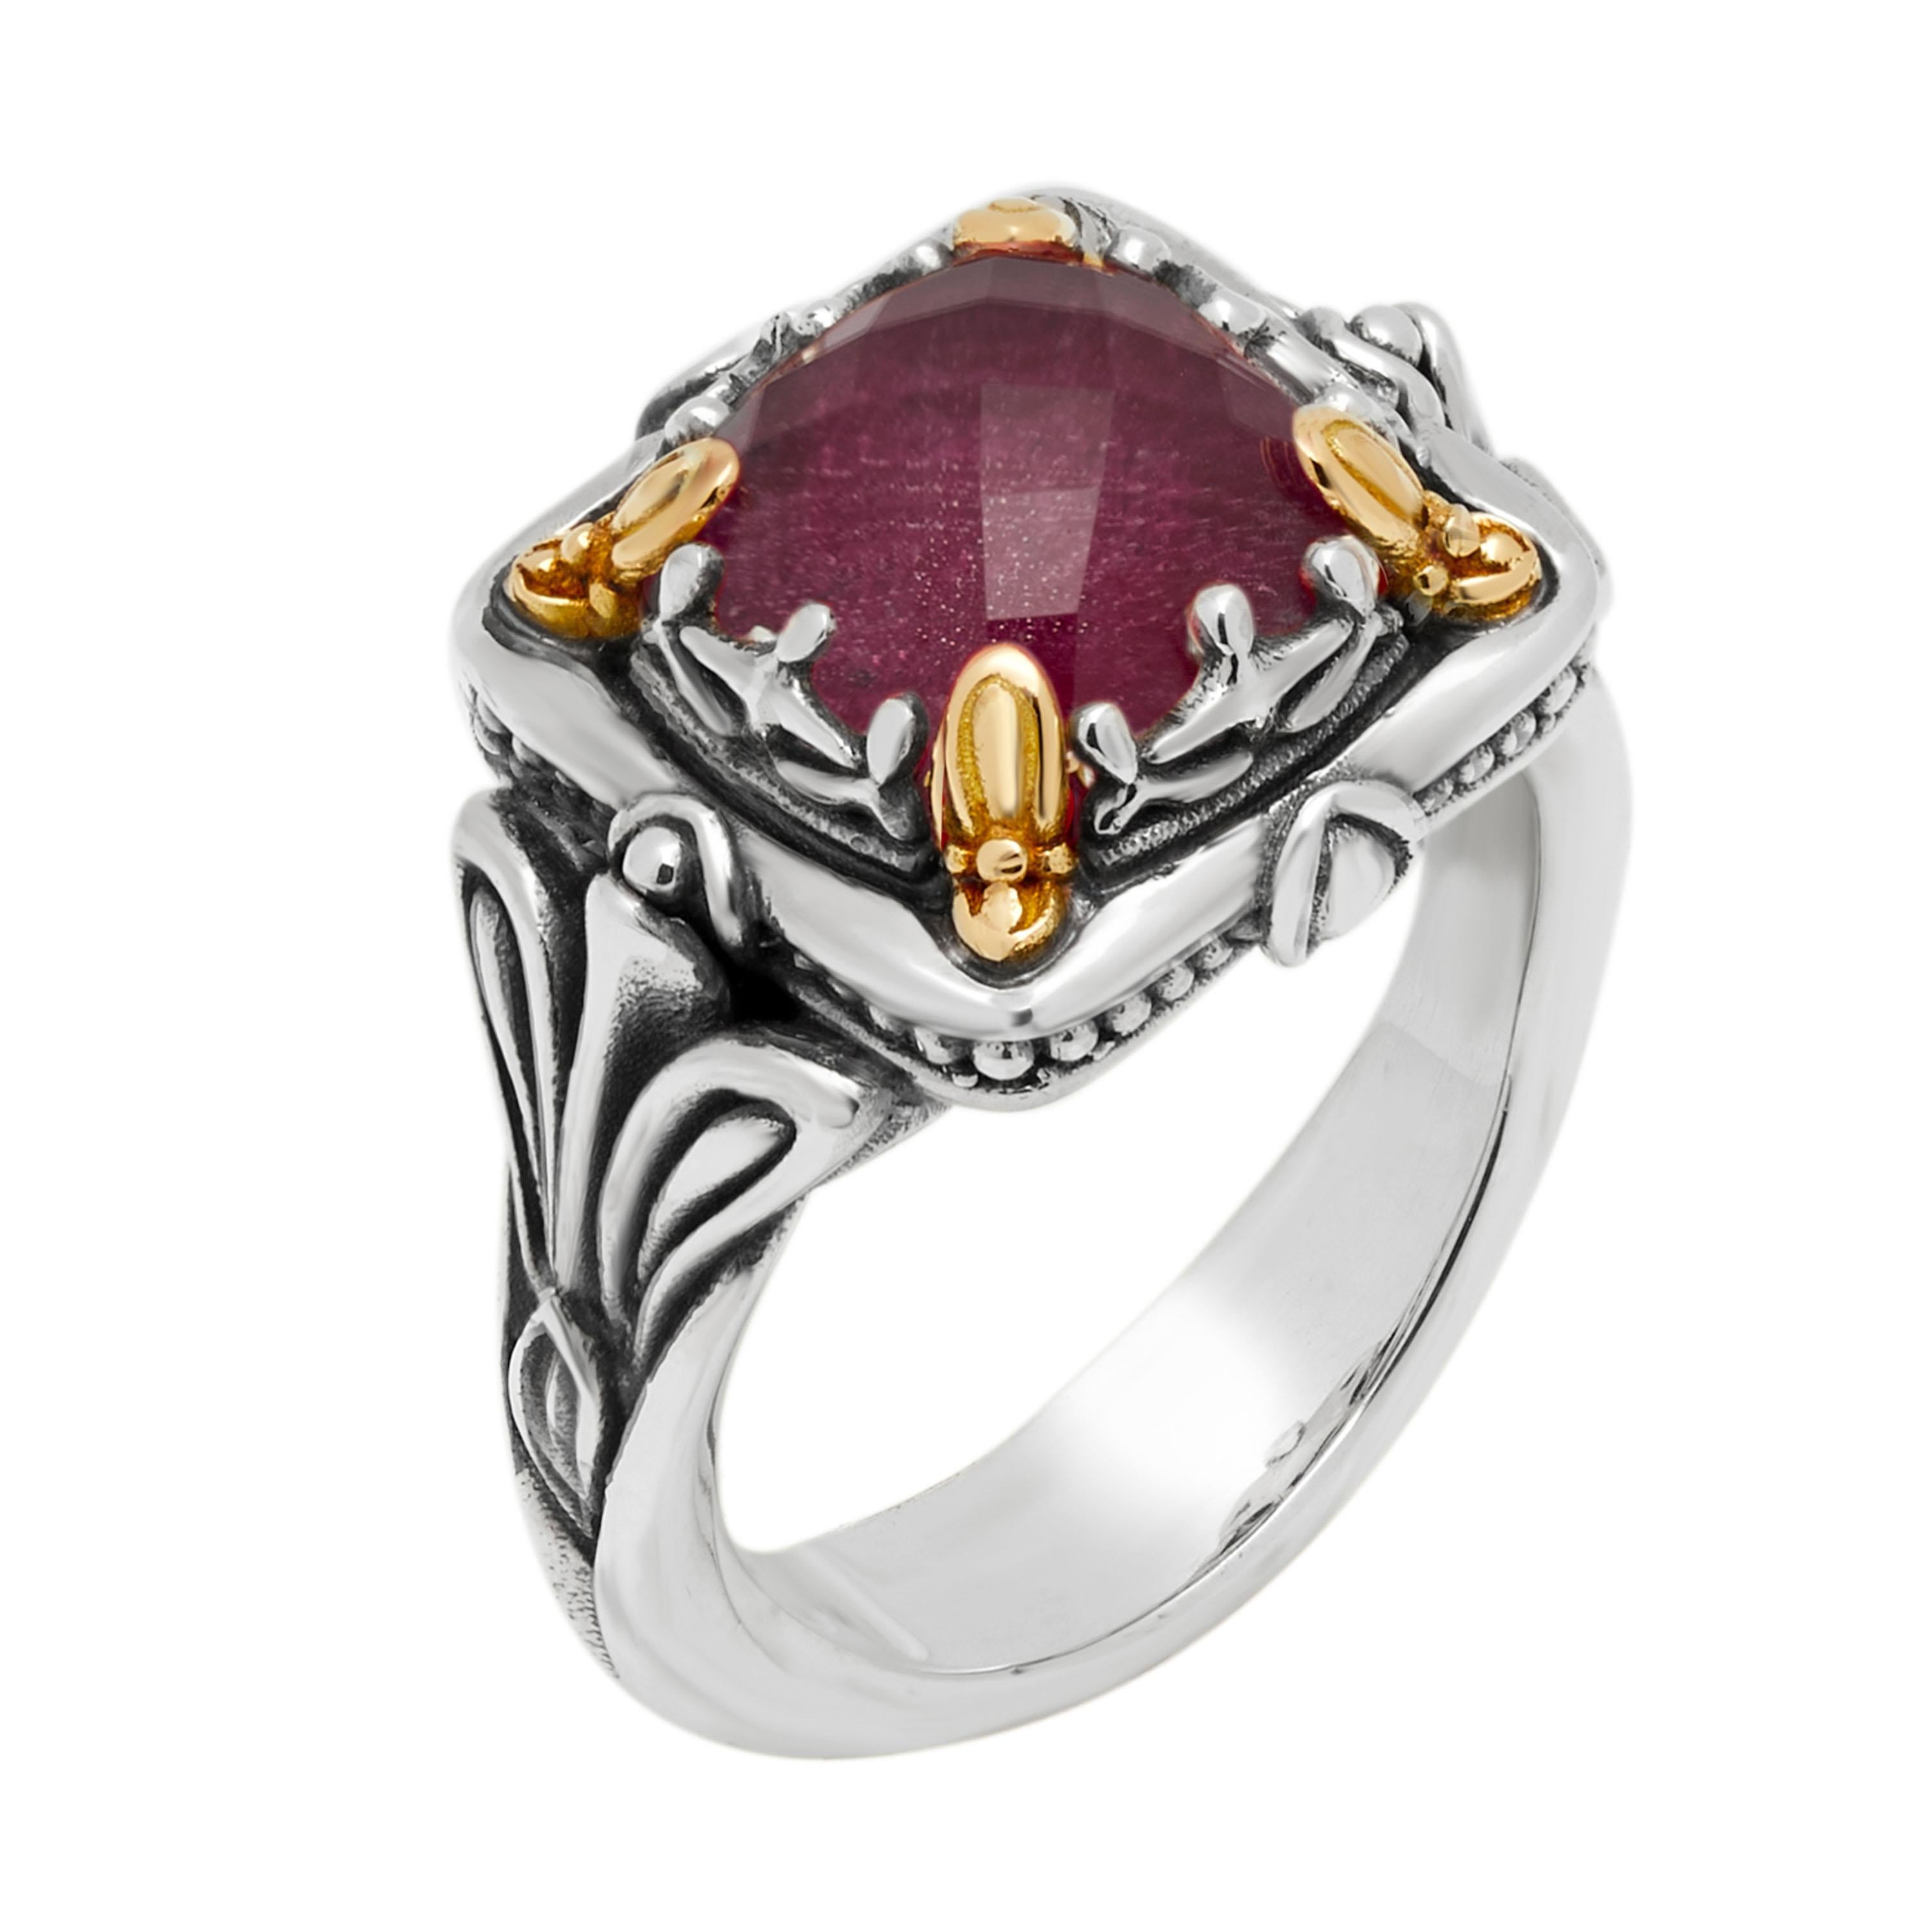 This captivating Konstantino sterling silver statement ring features a faceted ruby doublet held by 18K yellow gold prongs. The band width is 4.85mm. The ring size is 6.5 (53.1). 